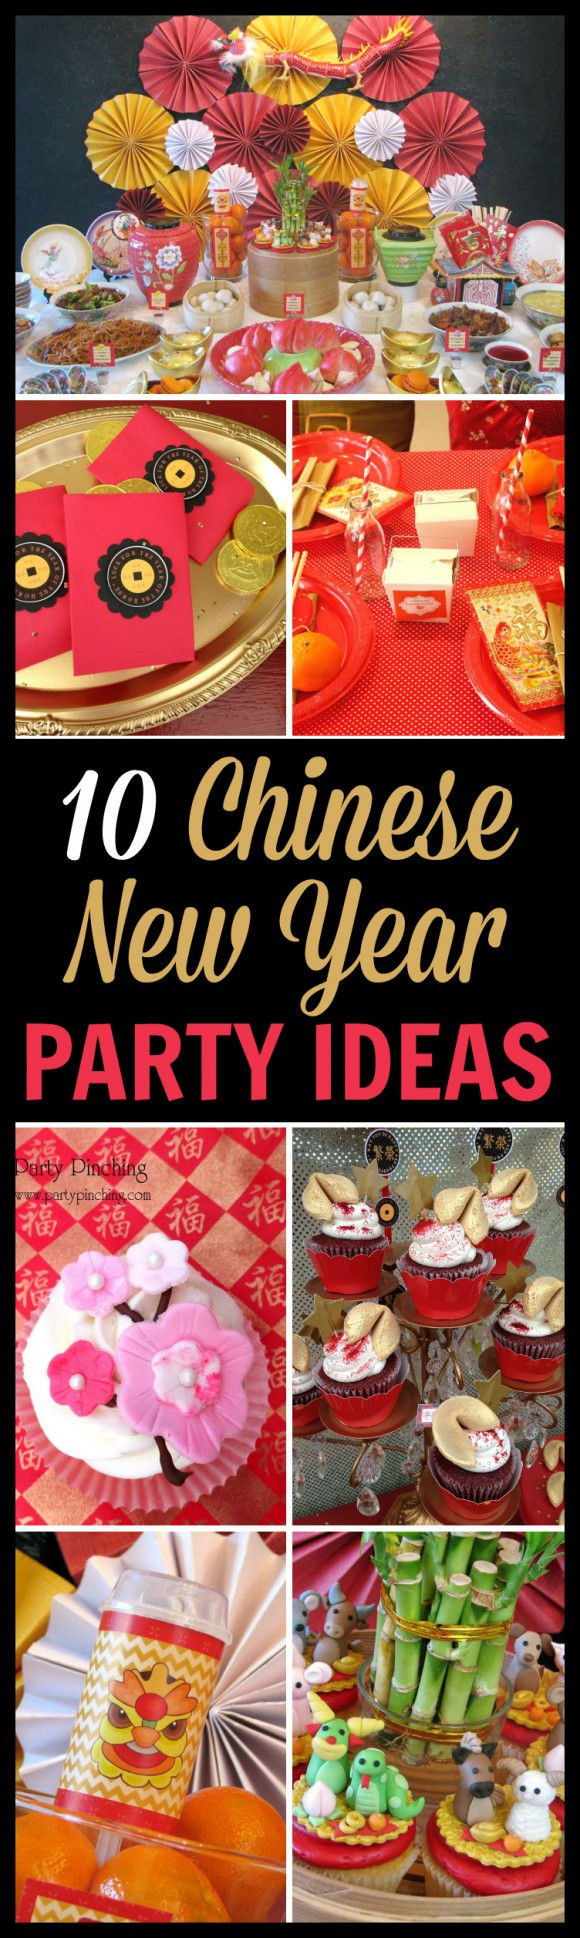 Chinese New Year Party Ideas
 Chinese New Year Party Ideas